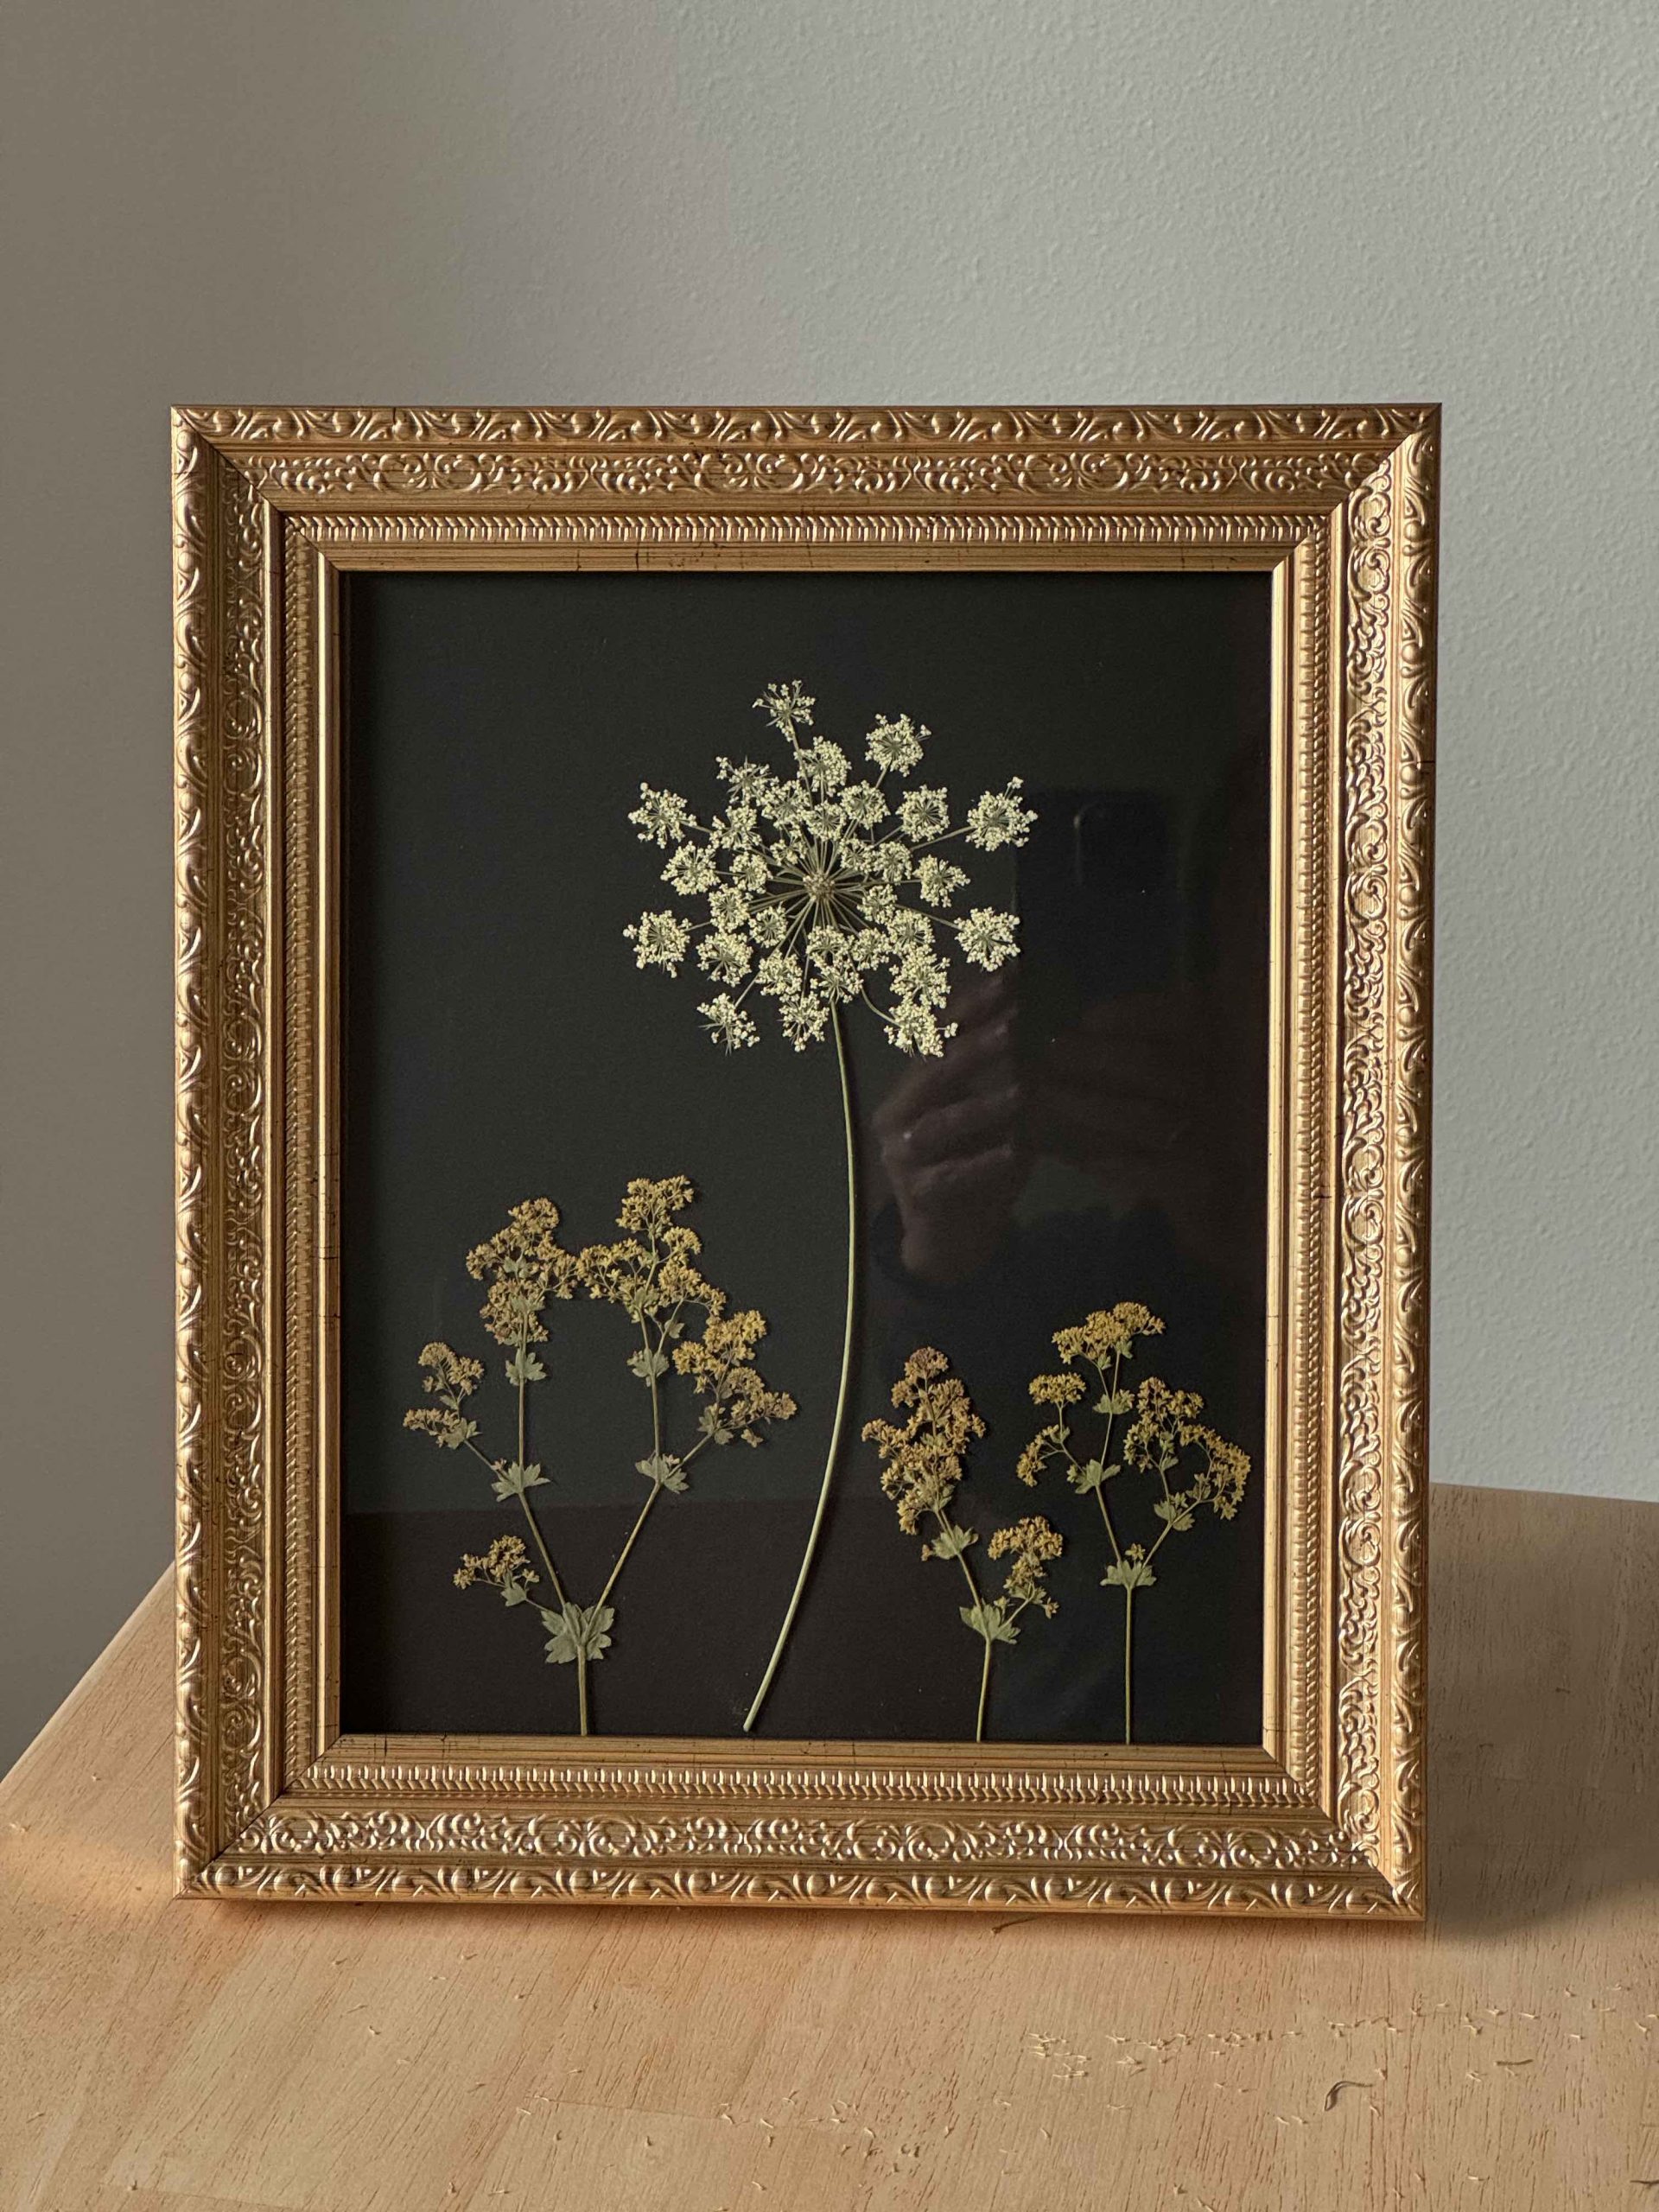 Pressed flowers of Queen Anne's lace and Lady's Mantle on a black background in a gold ornate frame.